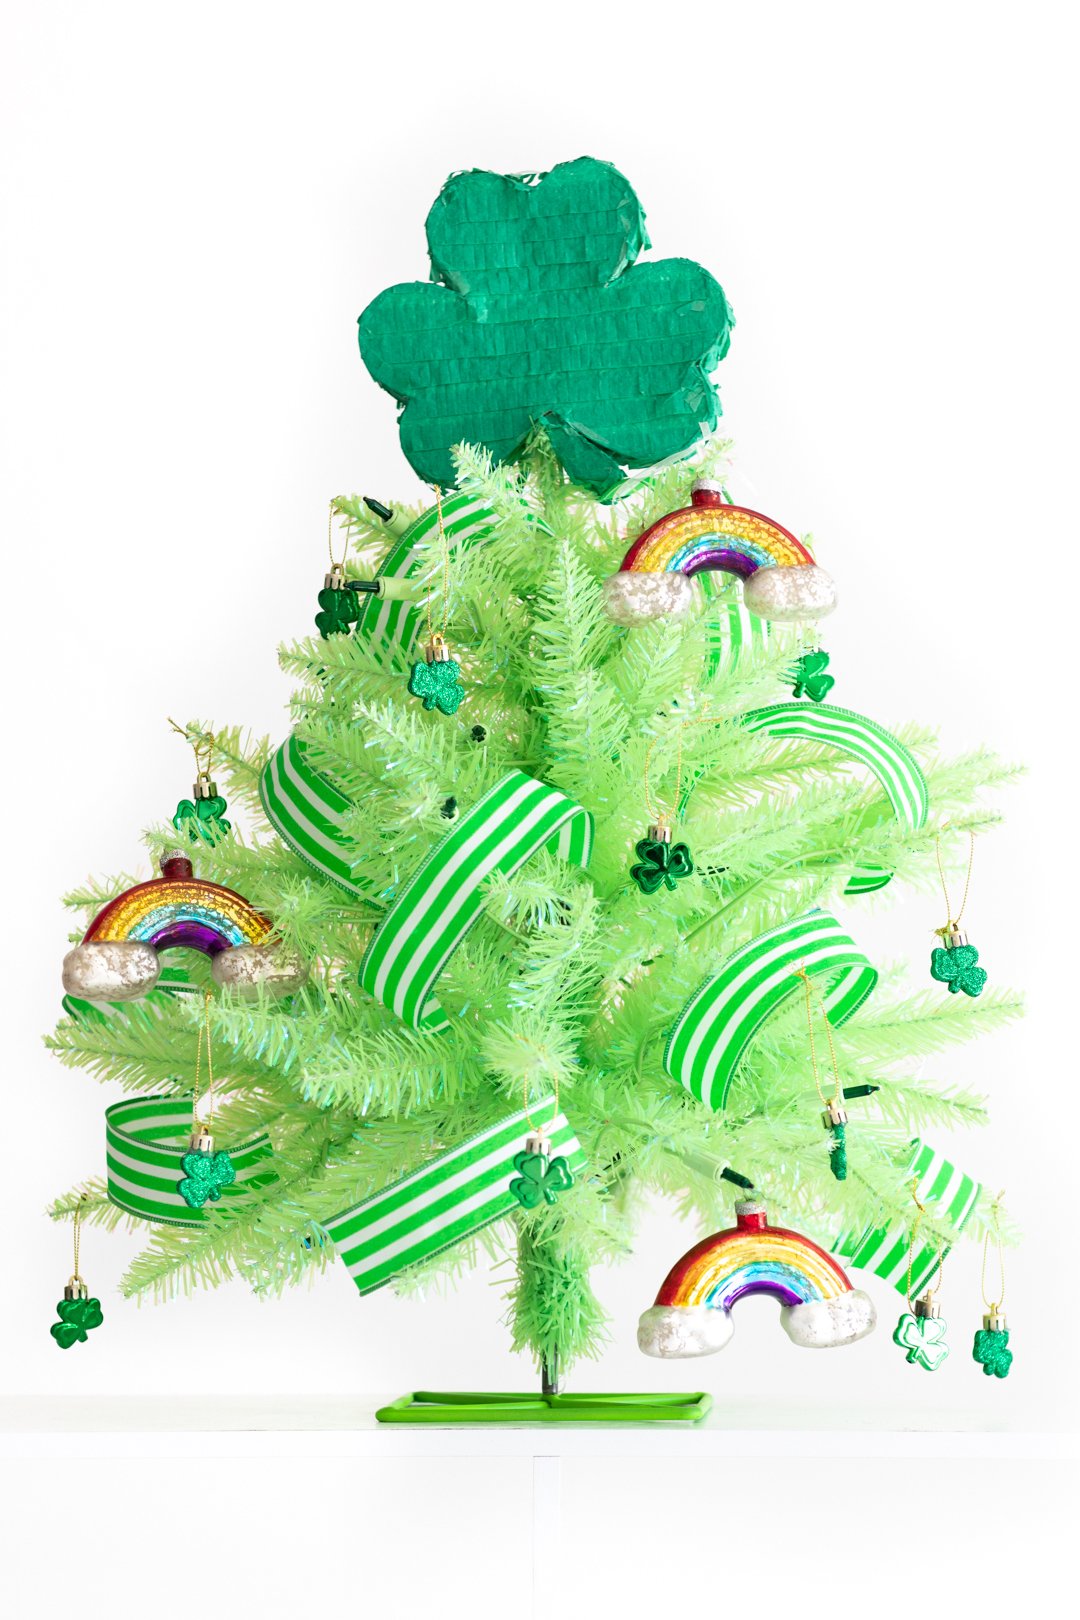 st. patrick's day tree using a mini lime green christmas tree with glass rainbow ornaments, green and white striped ribbon, mini shamrock ornaments and a mini shamrock piñata as a tree topper